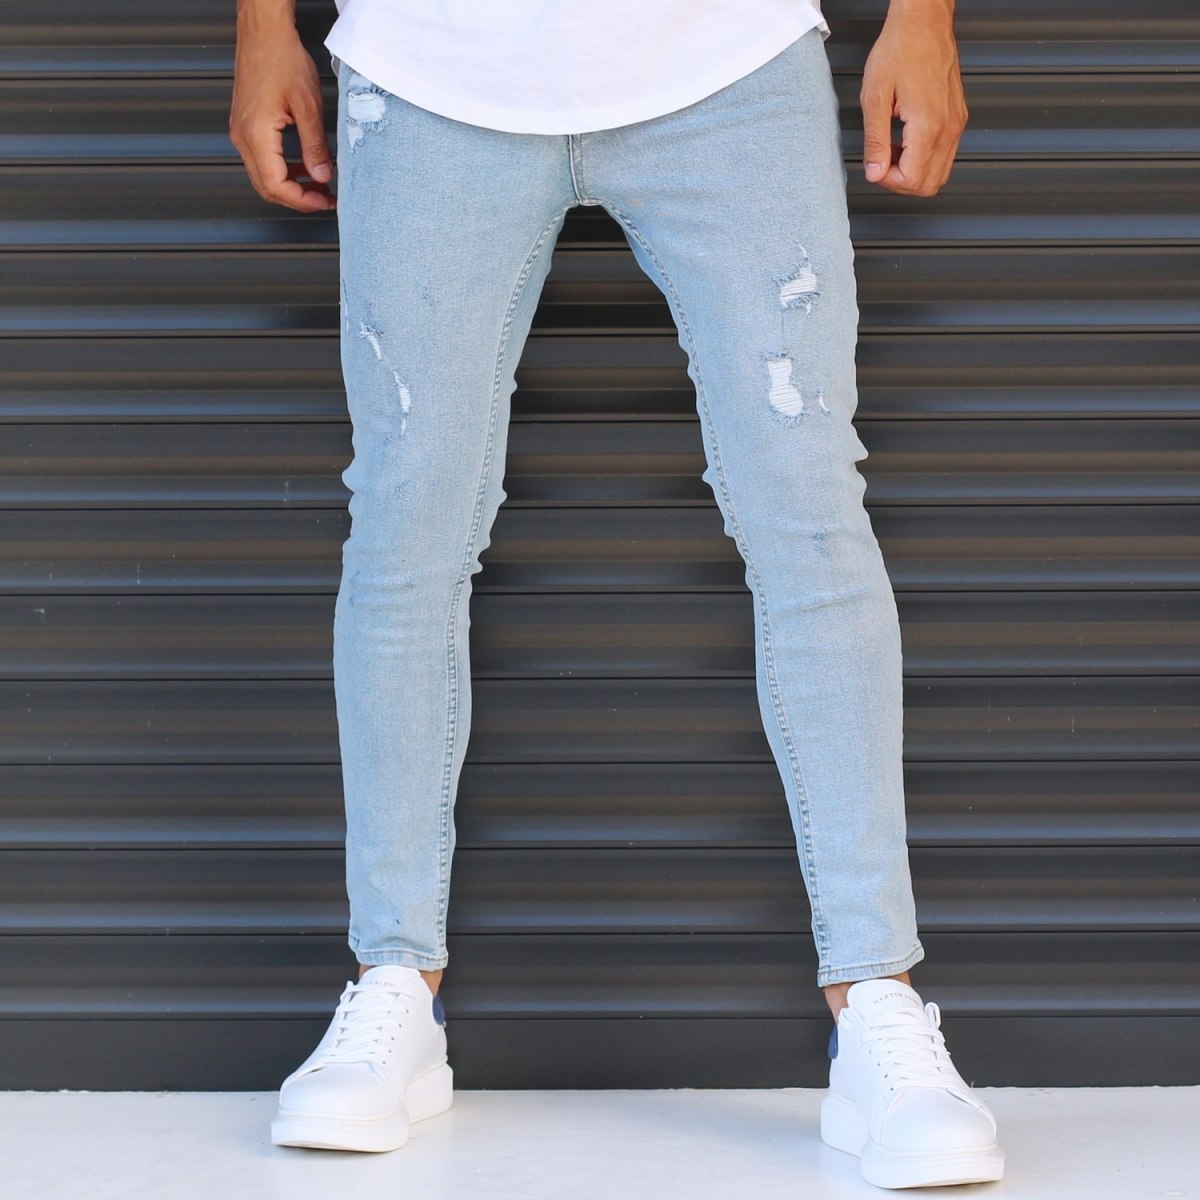 Men's Narrow Jeans With Thin Rips In Denim Blue